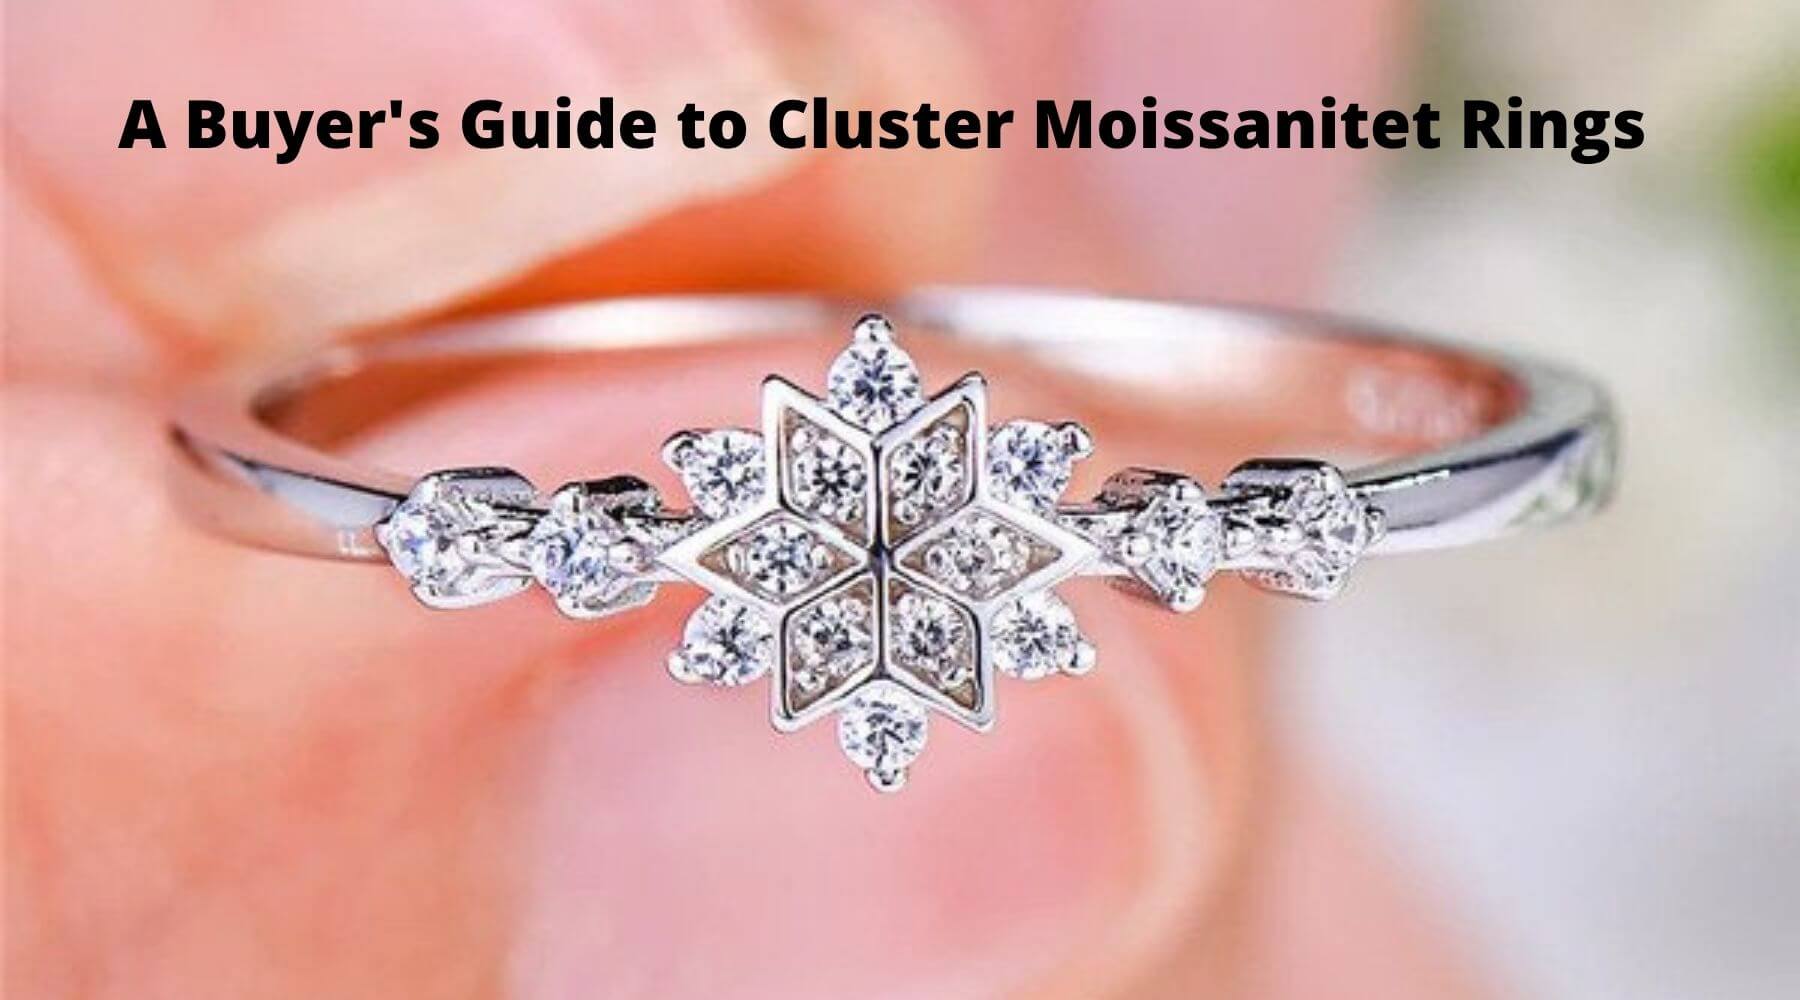 A Buyer's Guide to Cluster Moissanitet Rings